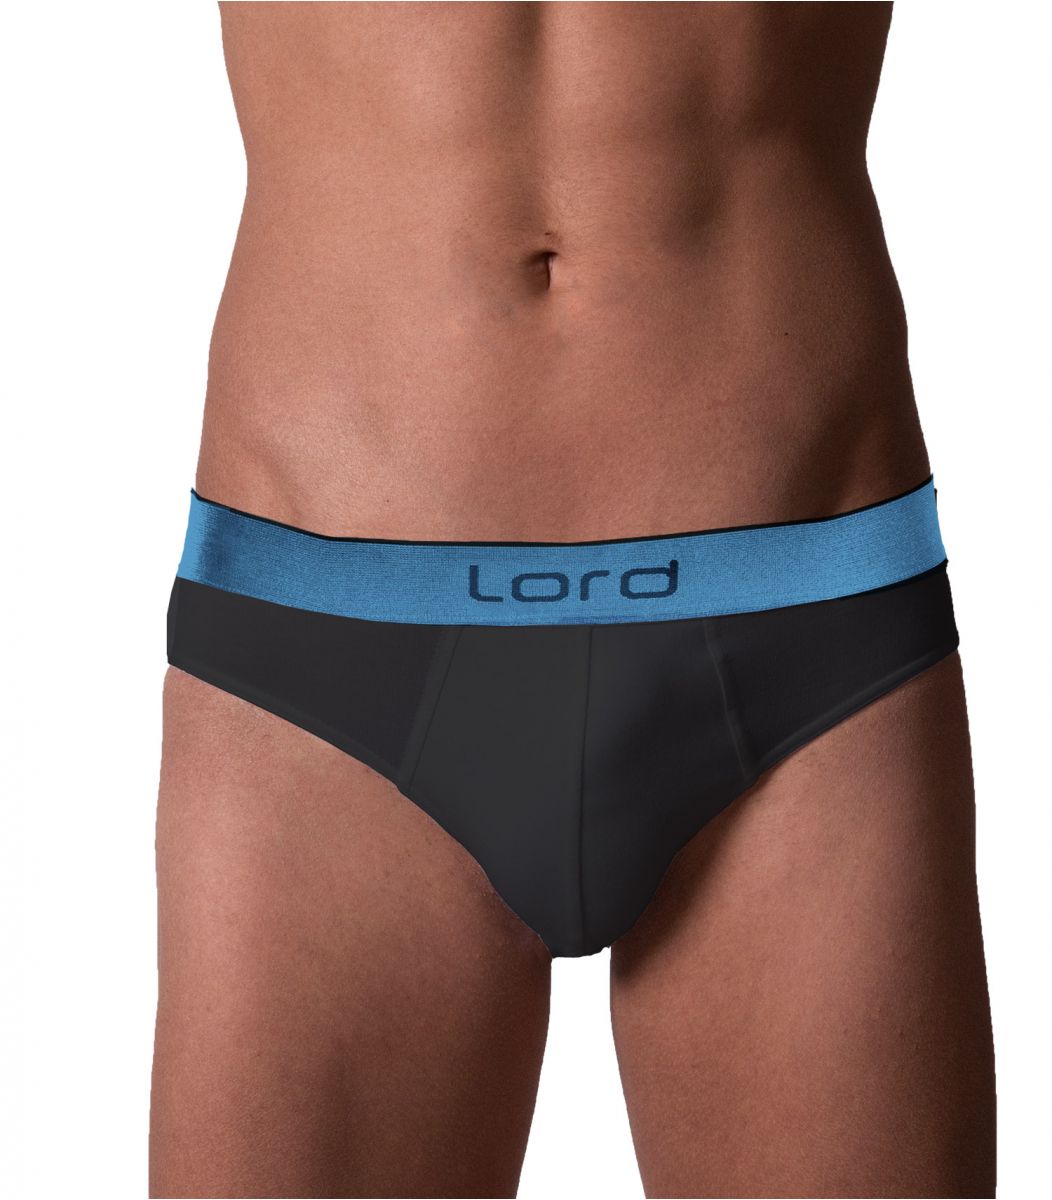 Lord Men Brief Shine rubber band, cotton Lord - 2